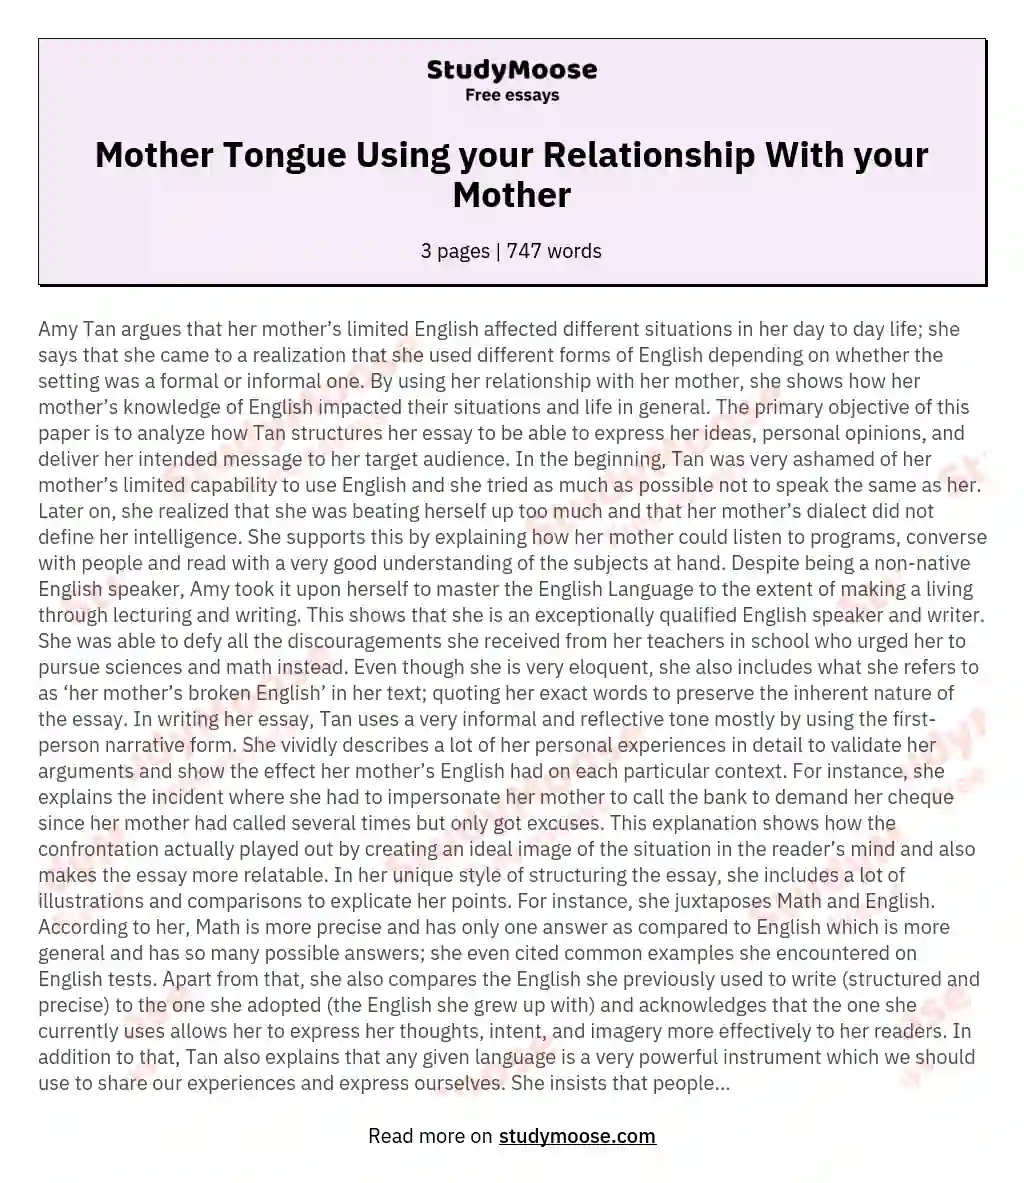 Mother Tongue Using your Relationship With your Mother essay